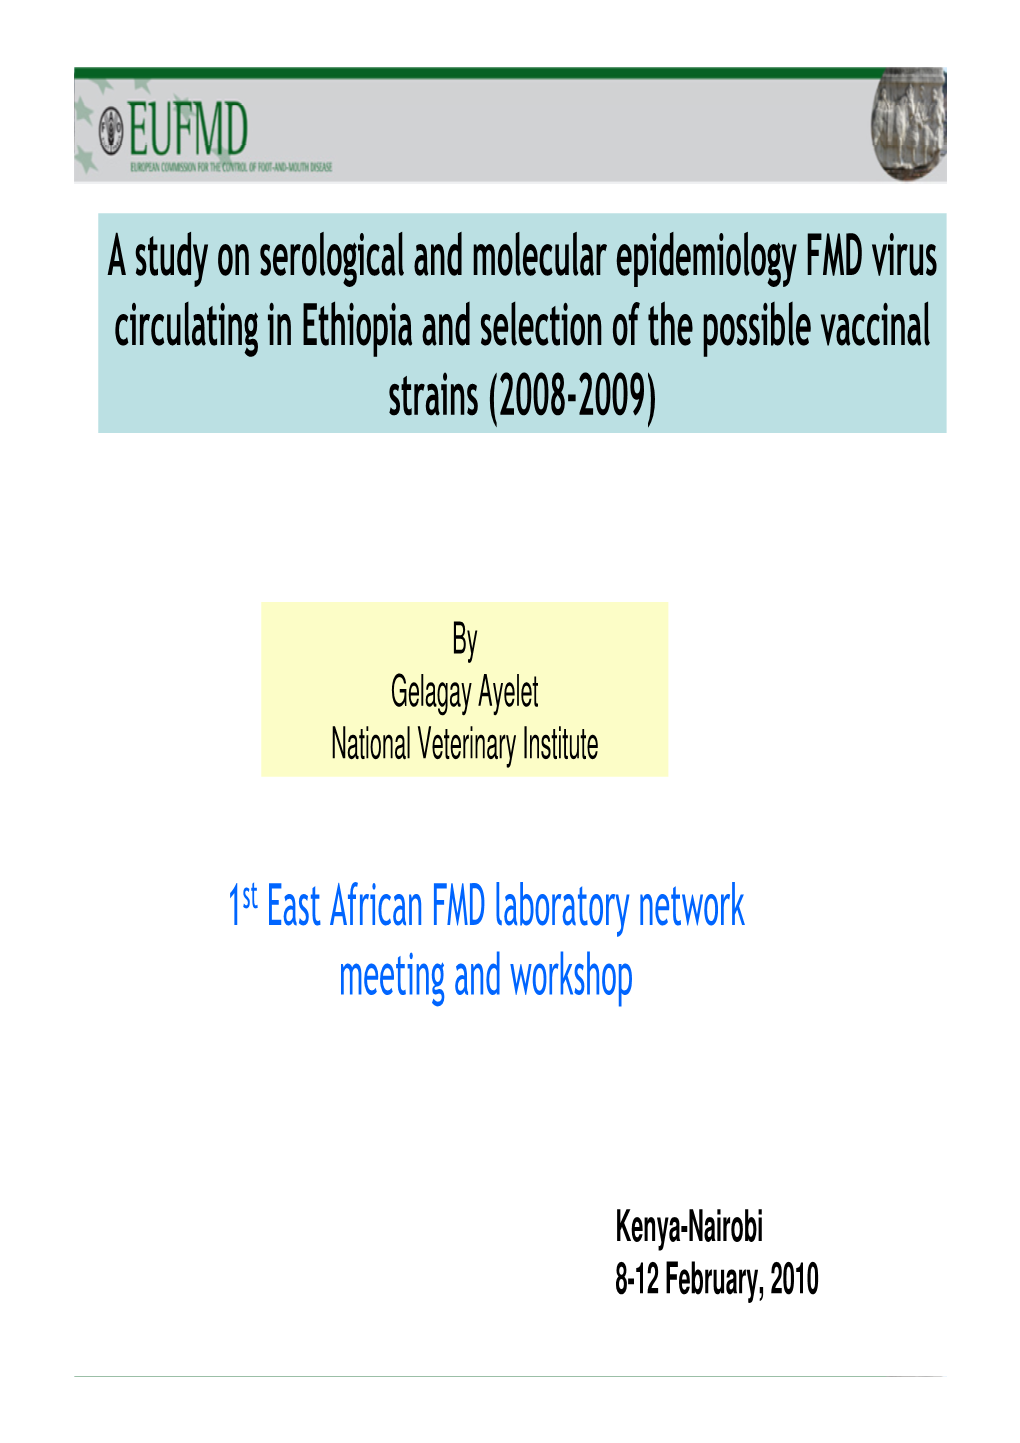 A Study on Serological and Molecular Epidemiology FMD Virus Circulating in Ethiopia and Selection of the Possible Vaccinal Strains (2008-2009)